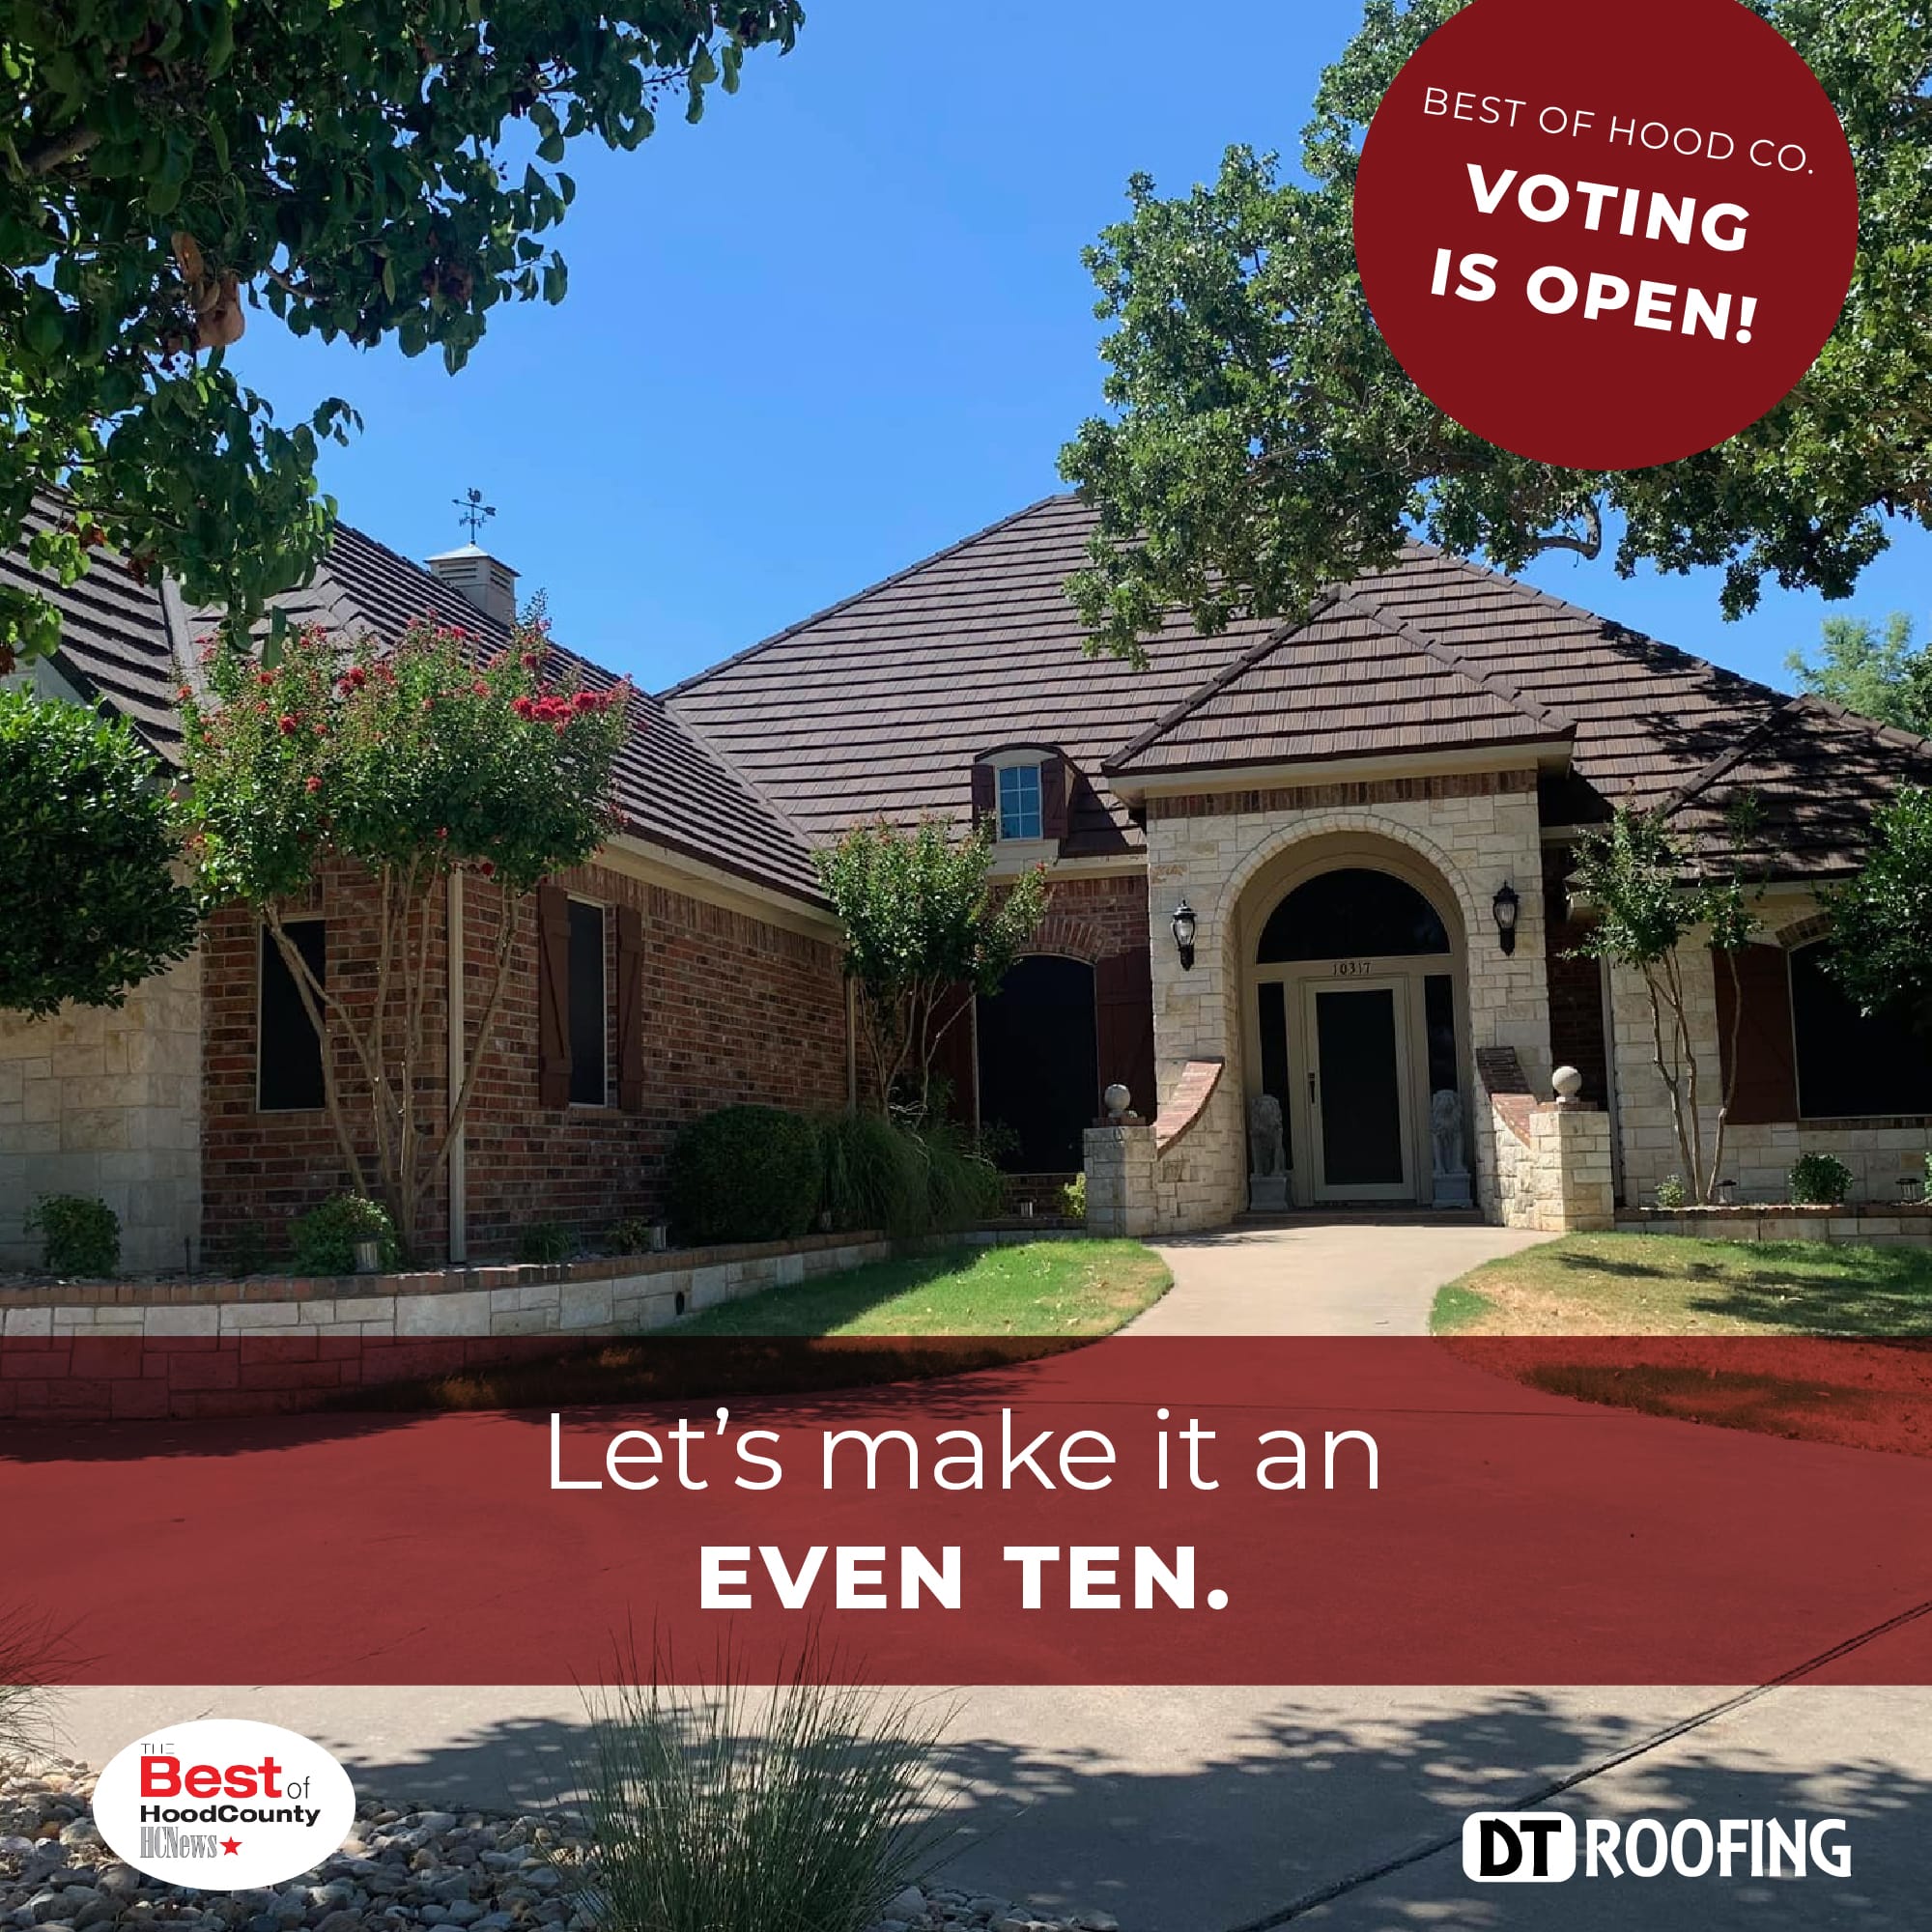 Best of Hood Co Voting is Open - Vote for DT Roofing